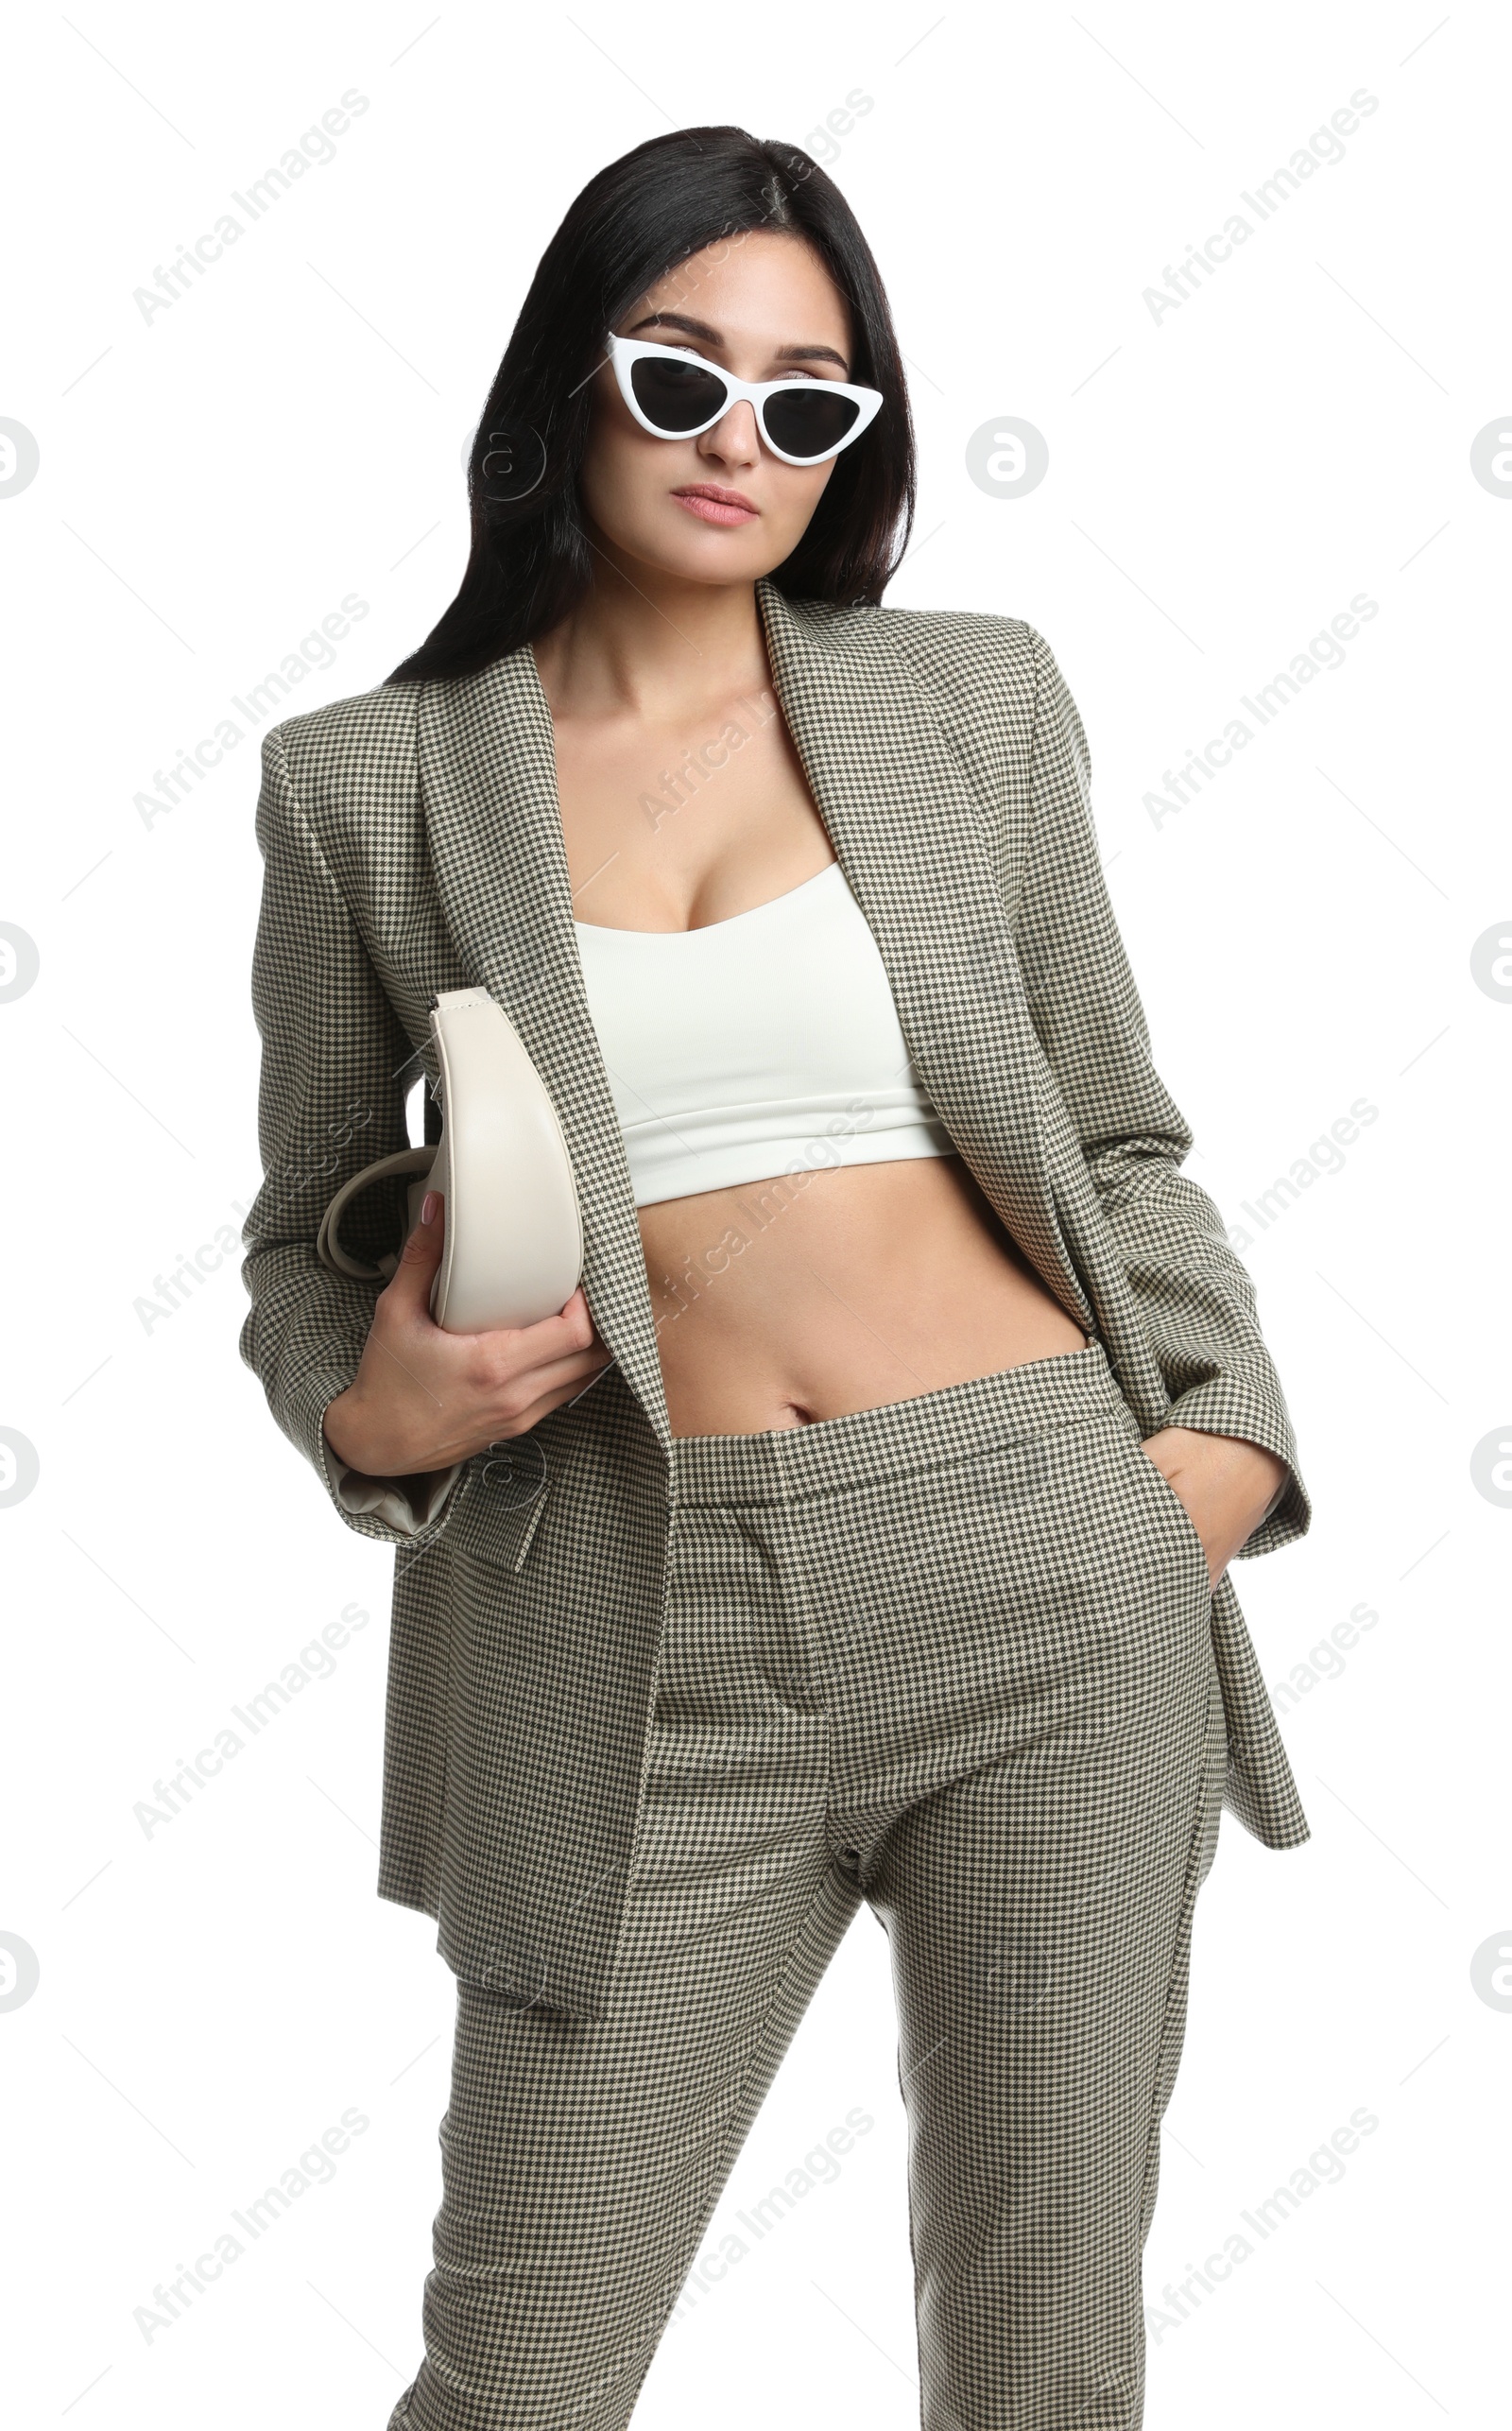 Photo of Beautiful woman with sunglasses and bag in formal suit on white background